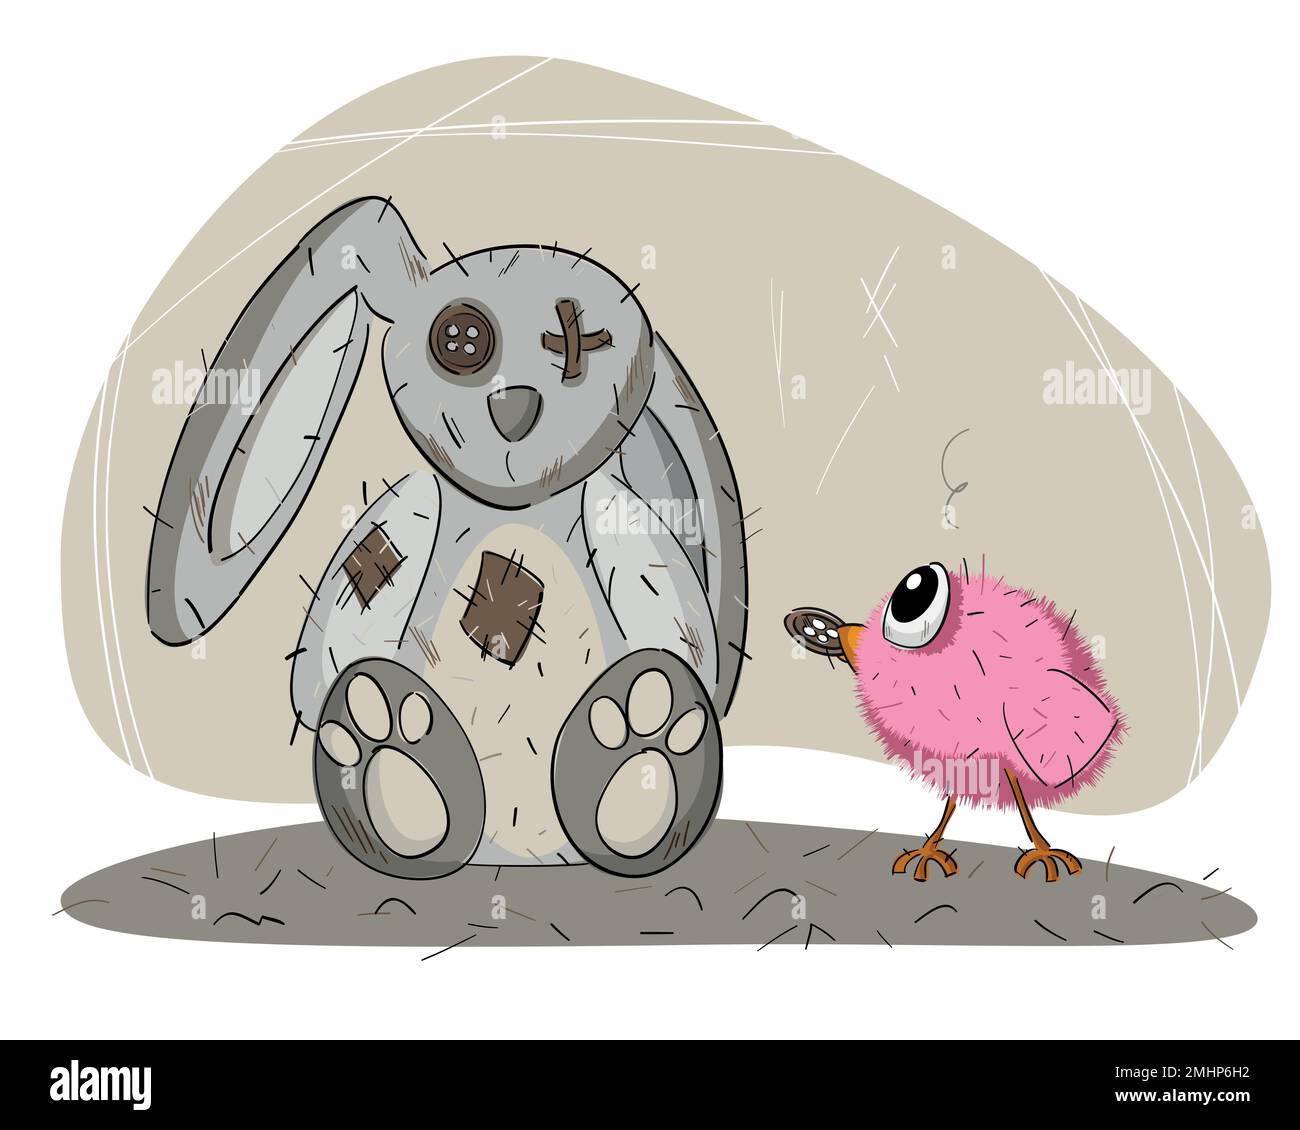 Cute and tender vector drawing of a little bird and a stuffed bunny. Illustration about good feelings, love and respect for others Stock Vector